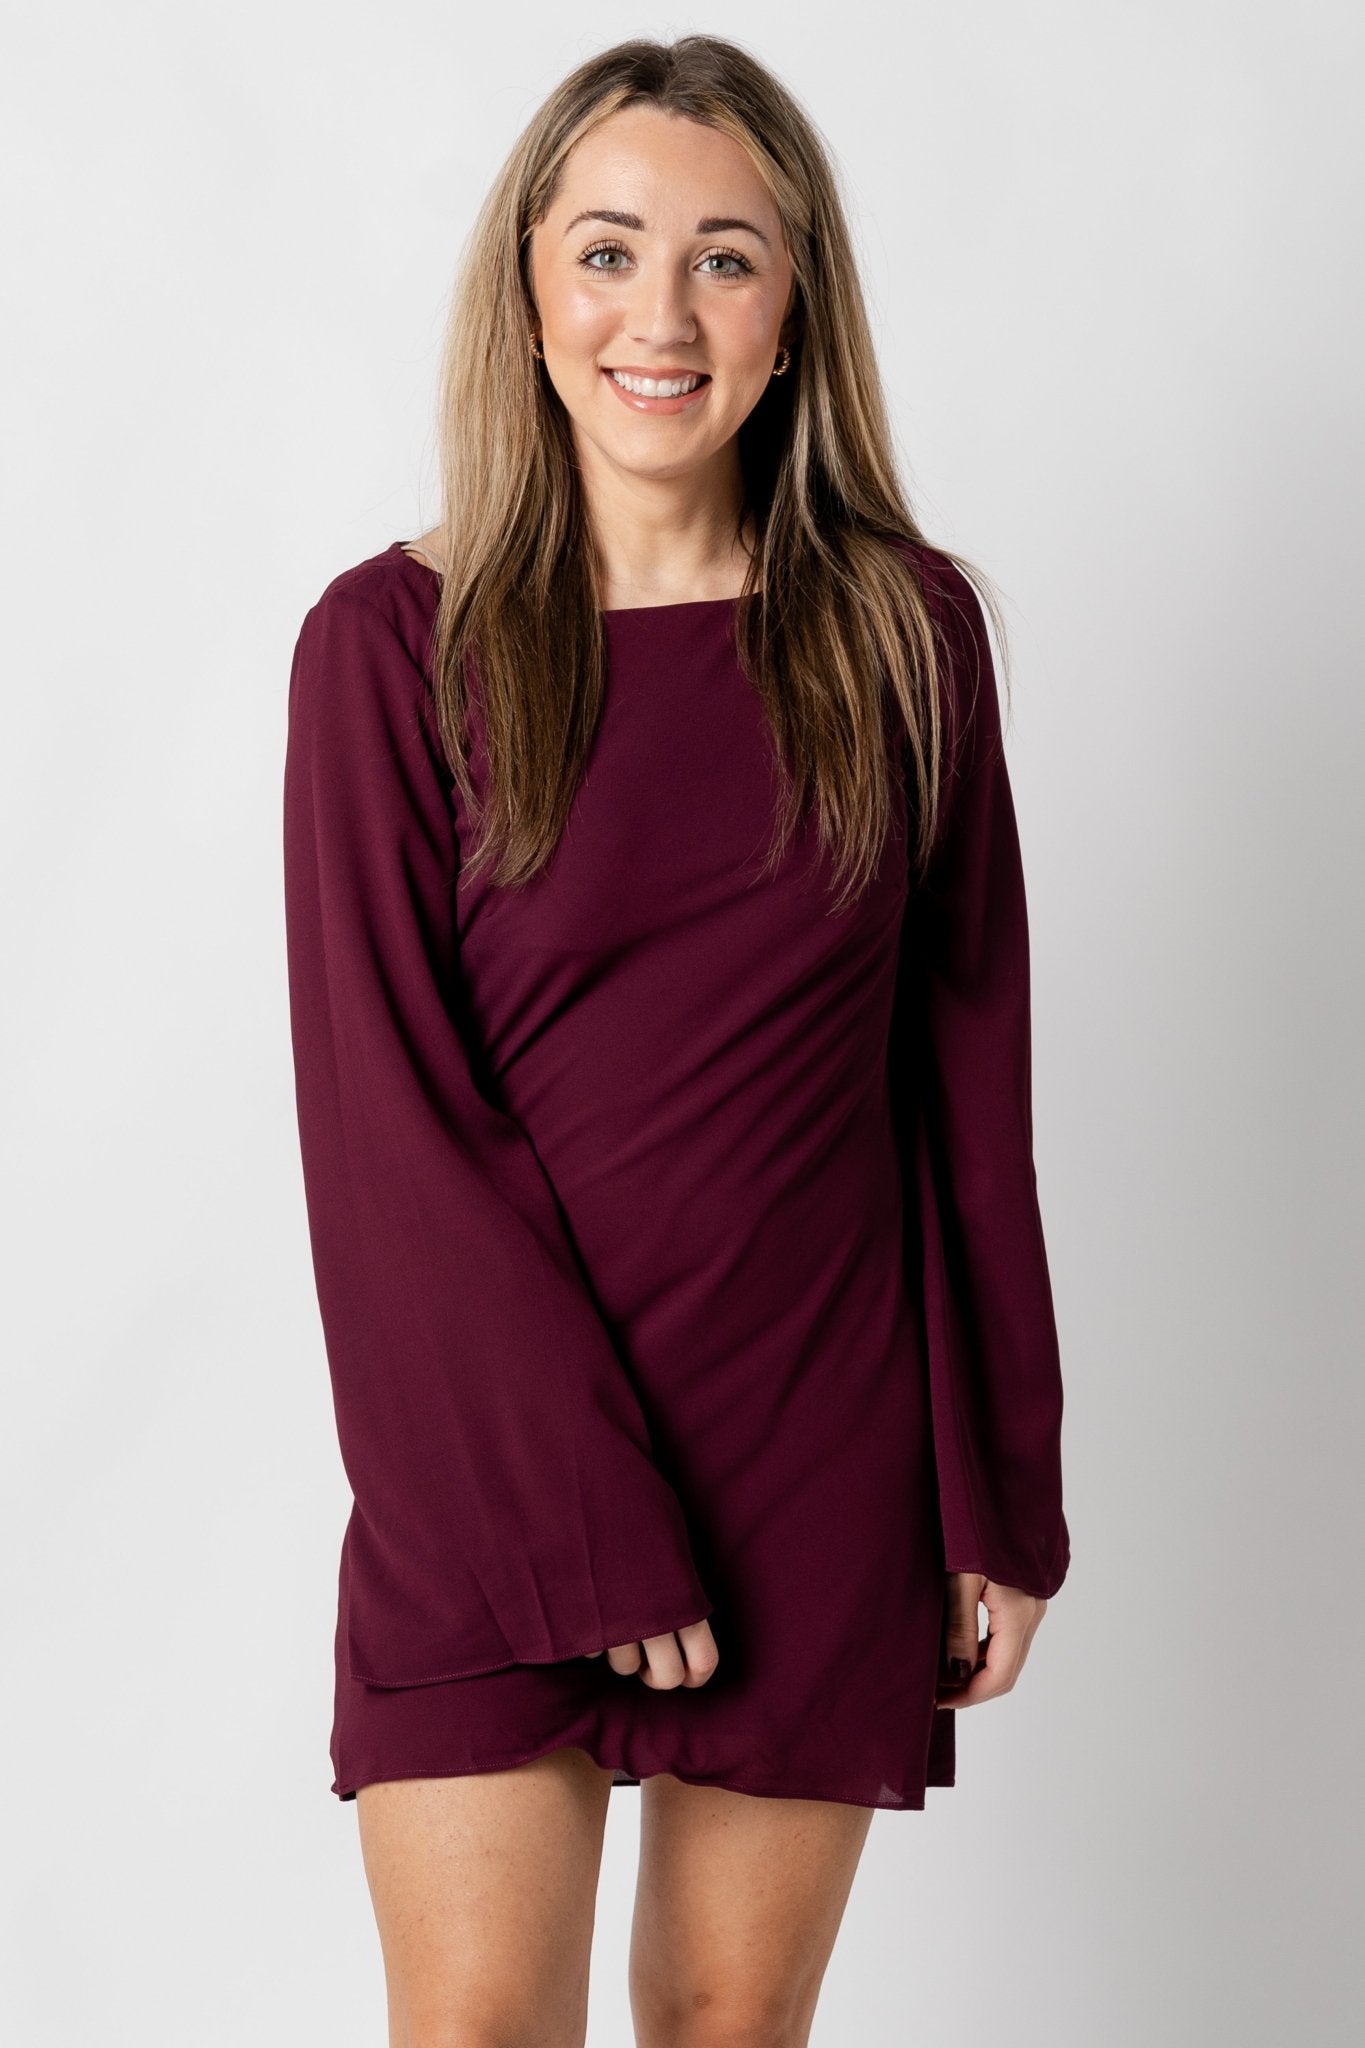 Bell sleeve mini dress wine - Affordable dress - Boutique Dresses at Lush Fashion Lounge Boutique in Oklahoma City